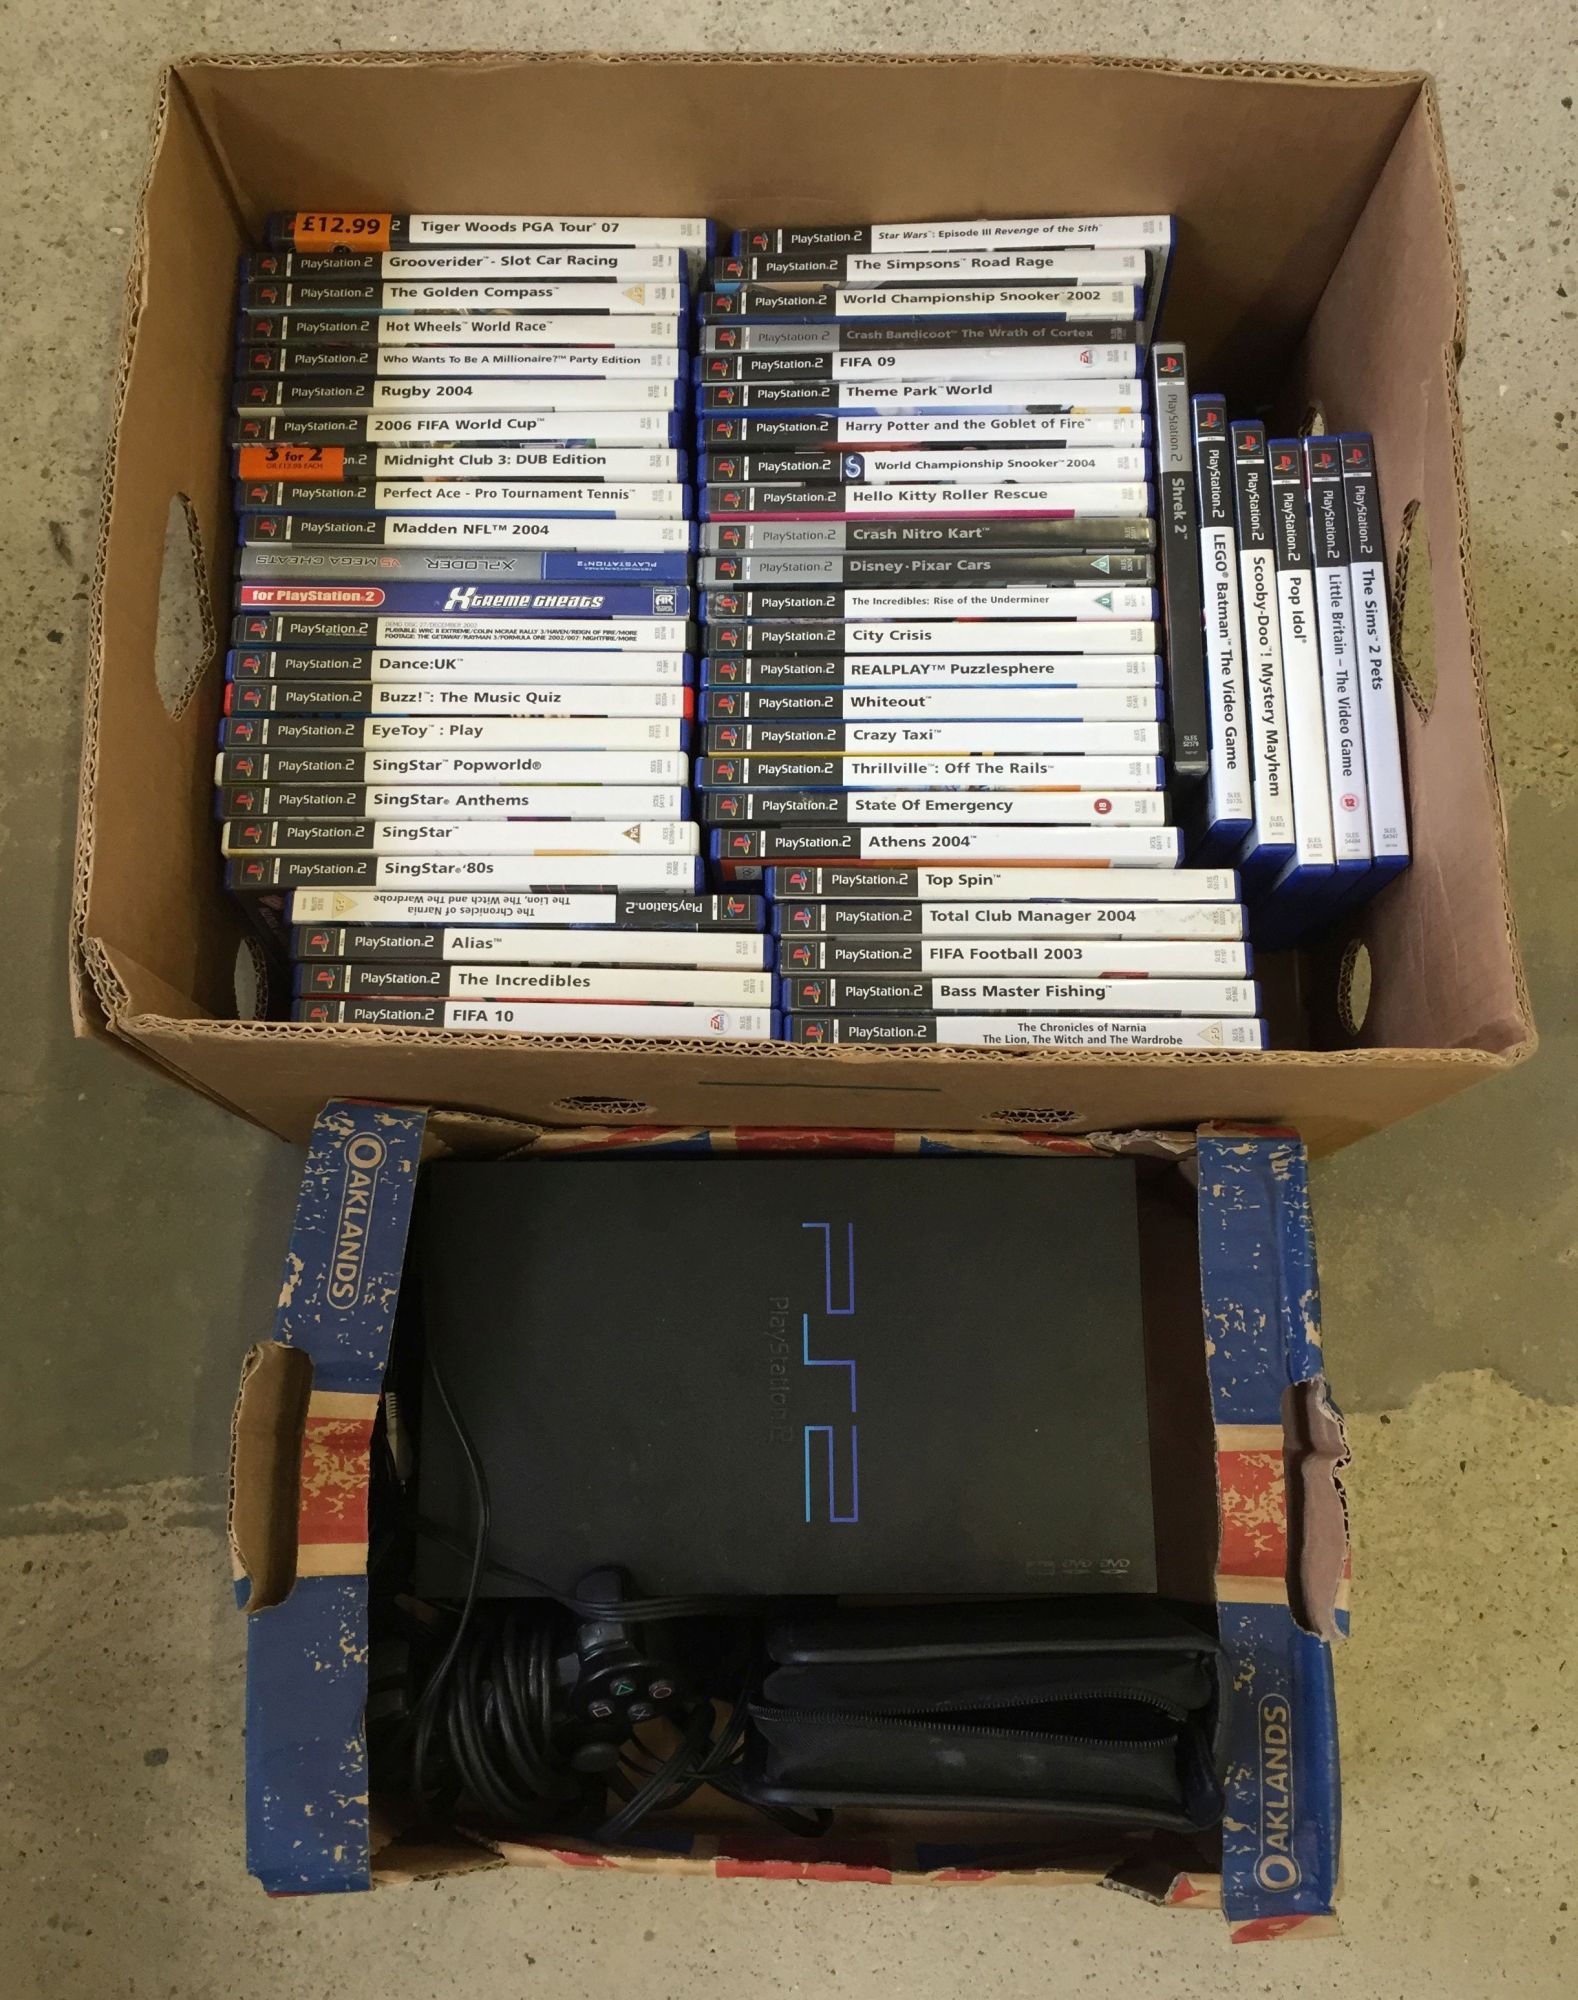 An unboxed PS2 original console together with controller, memory card, video leads (no power